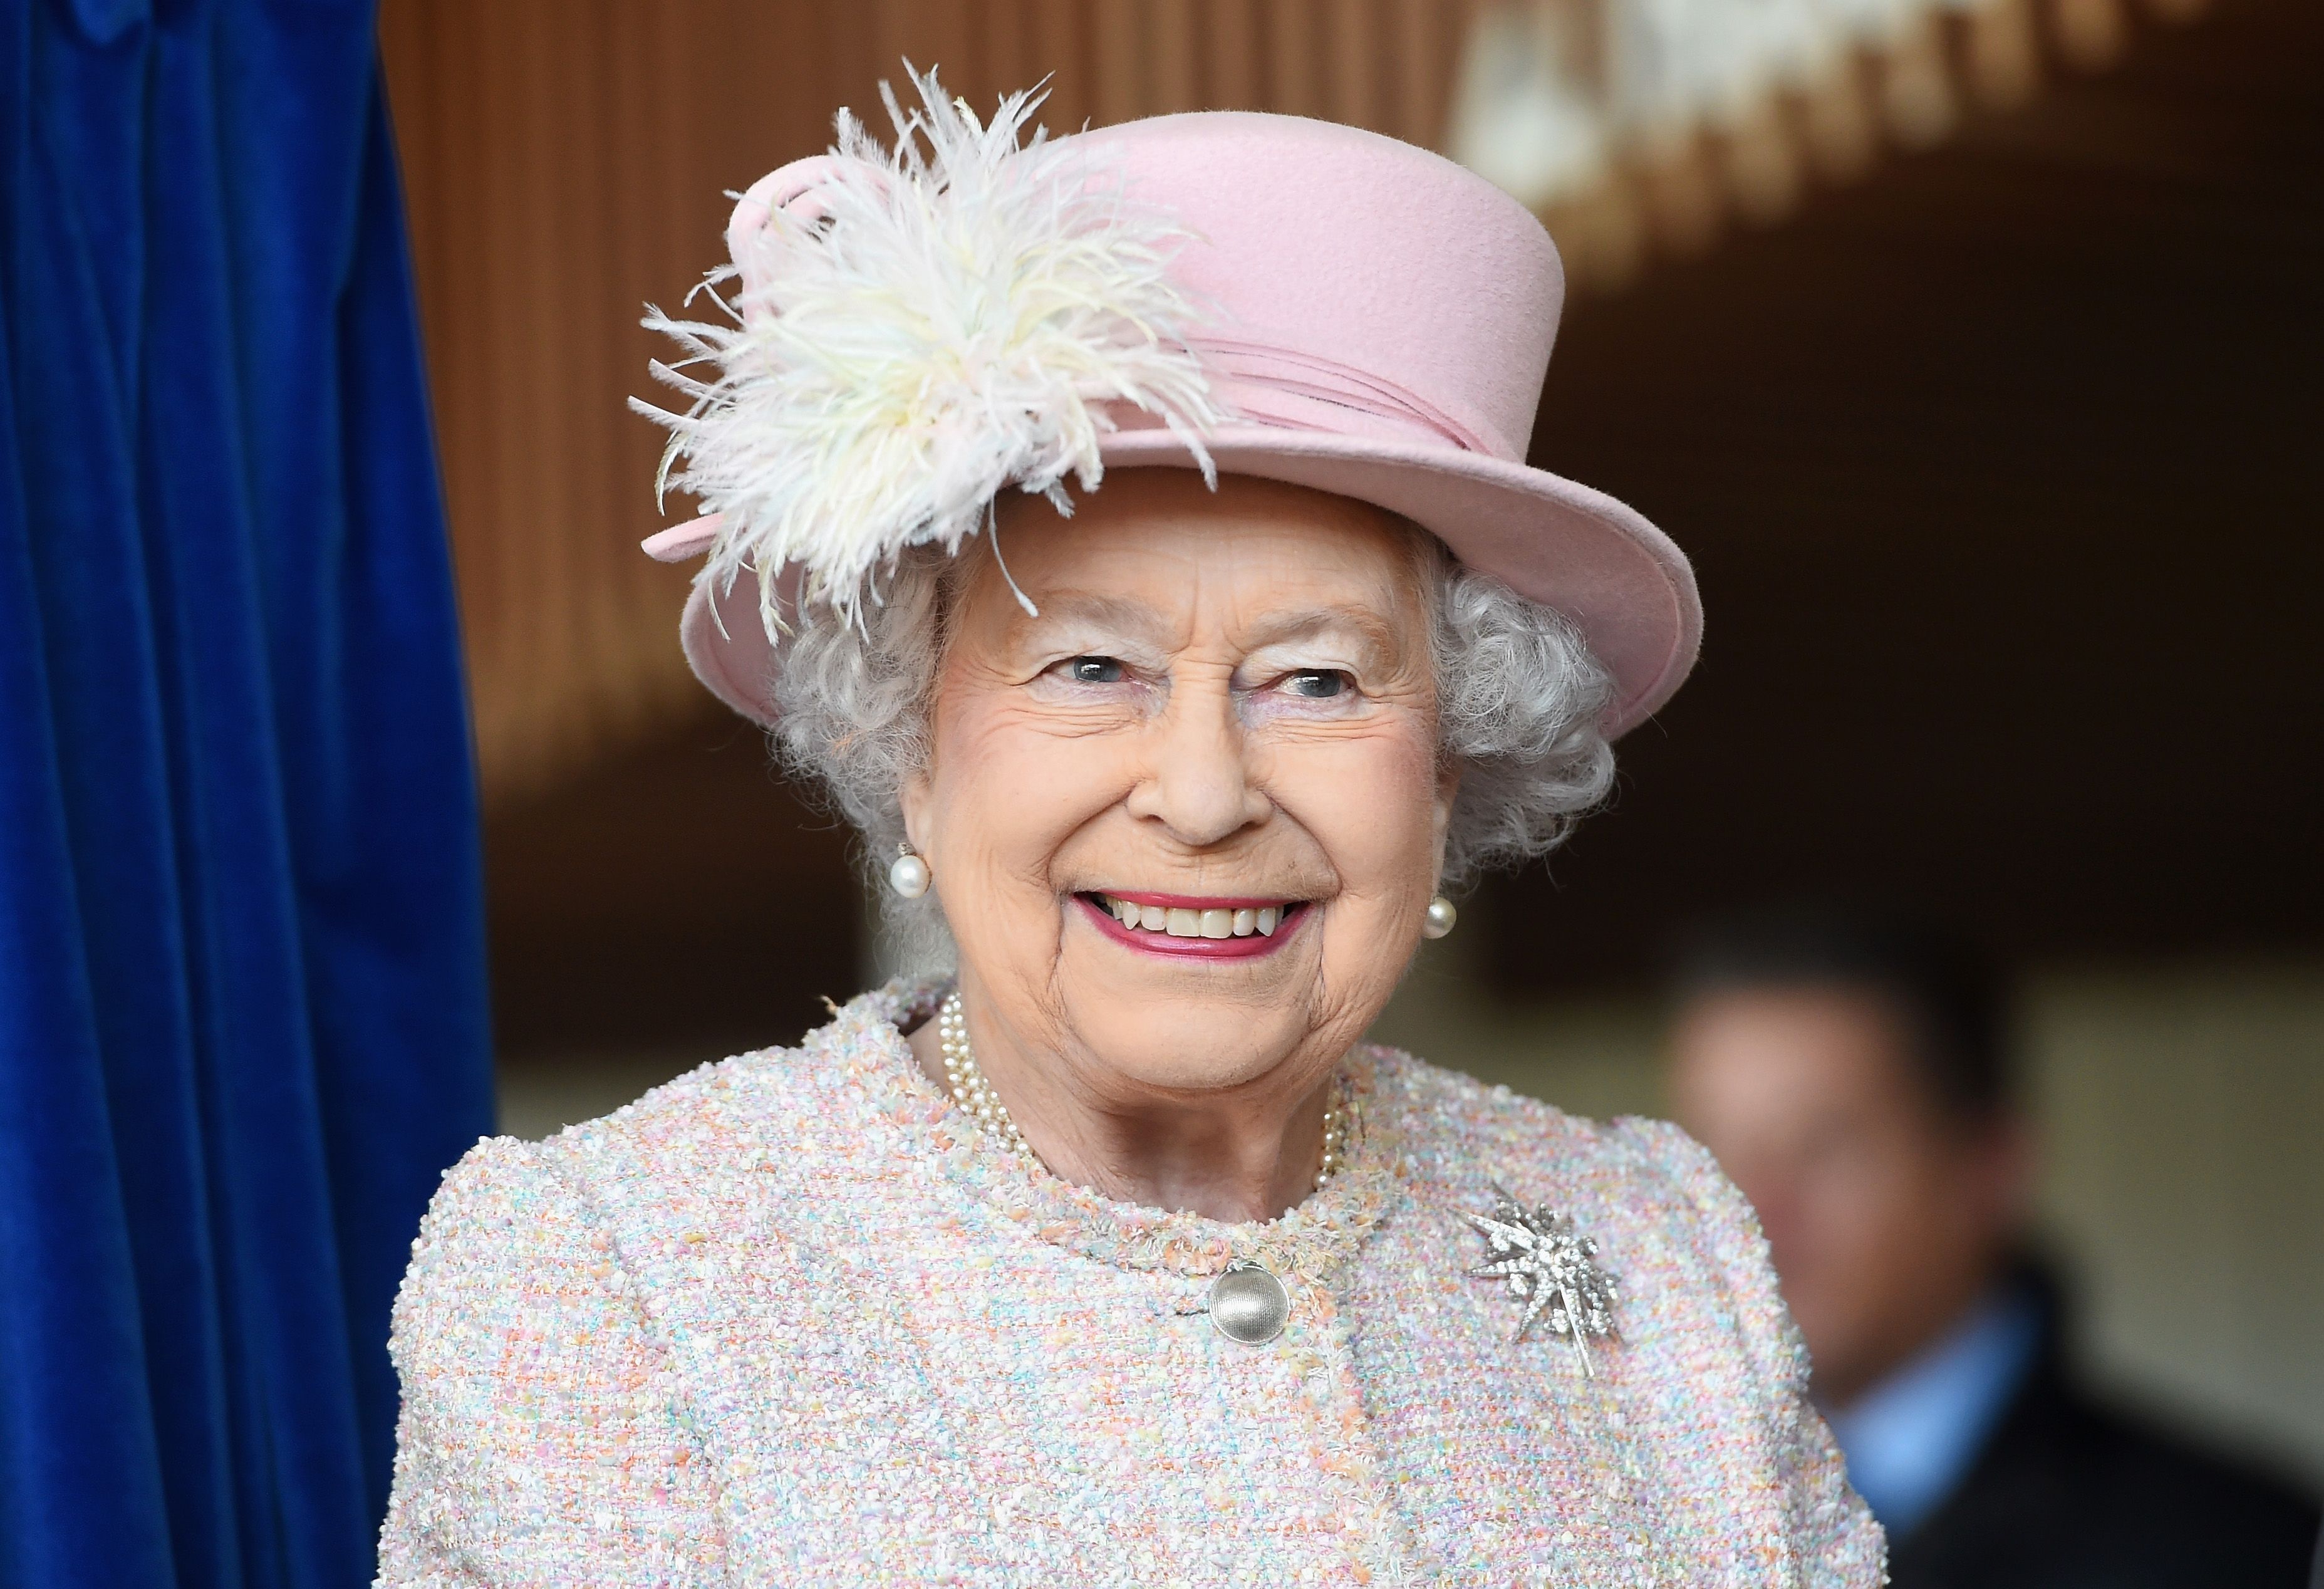 Launer launches handbags to celebrate Queen's 94th birthday